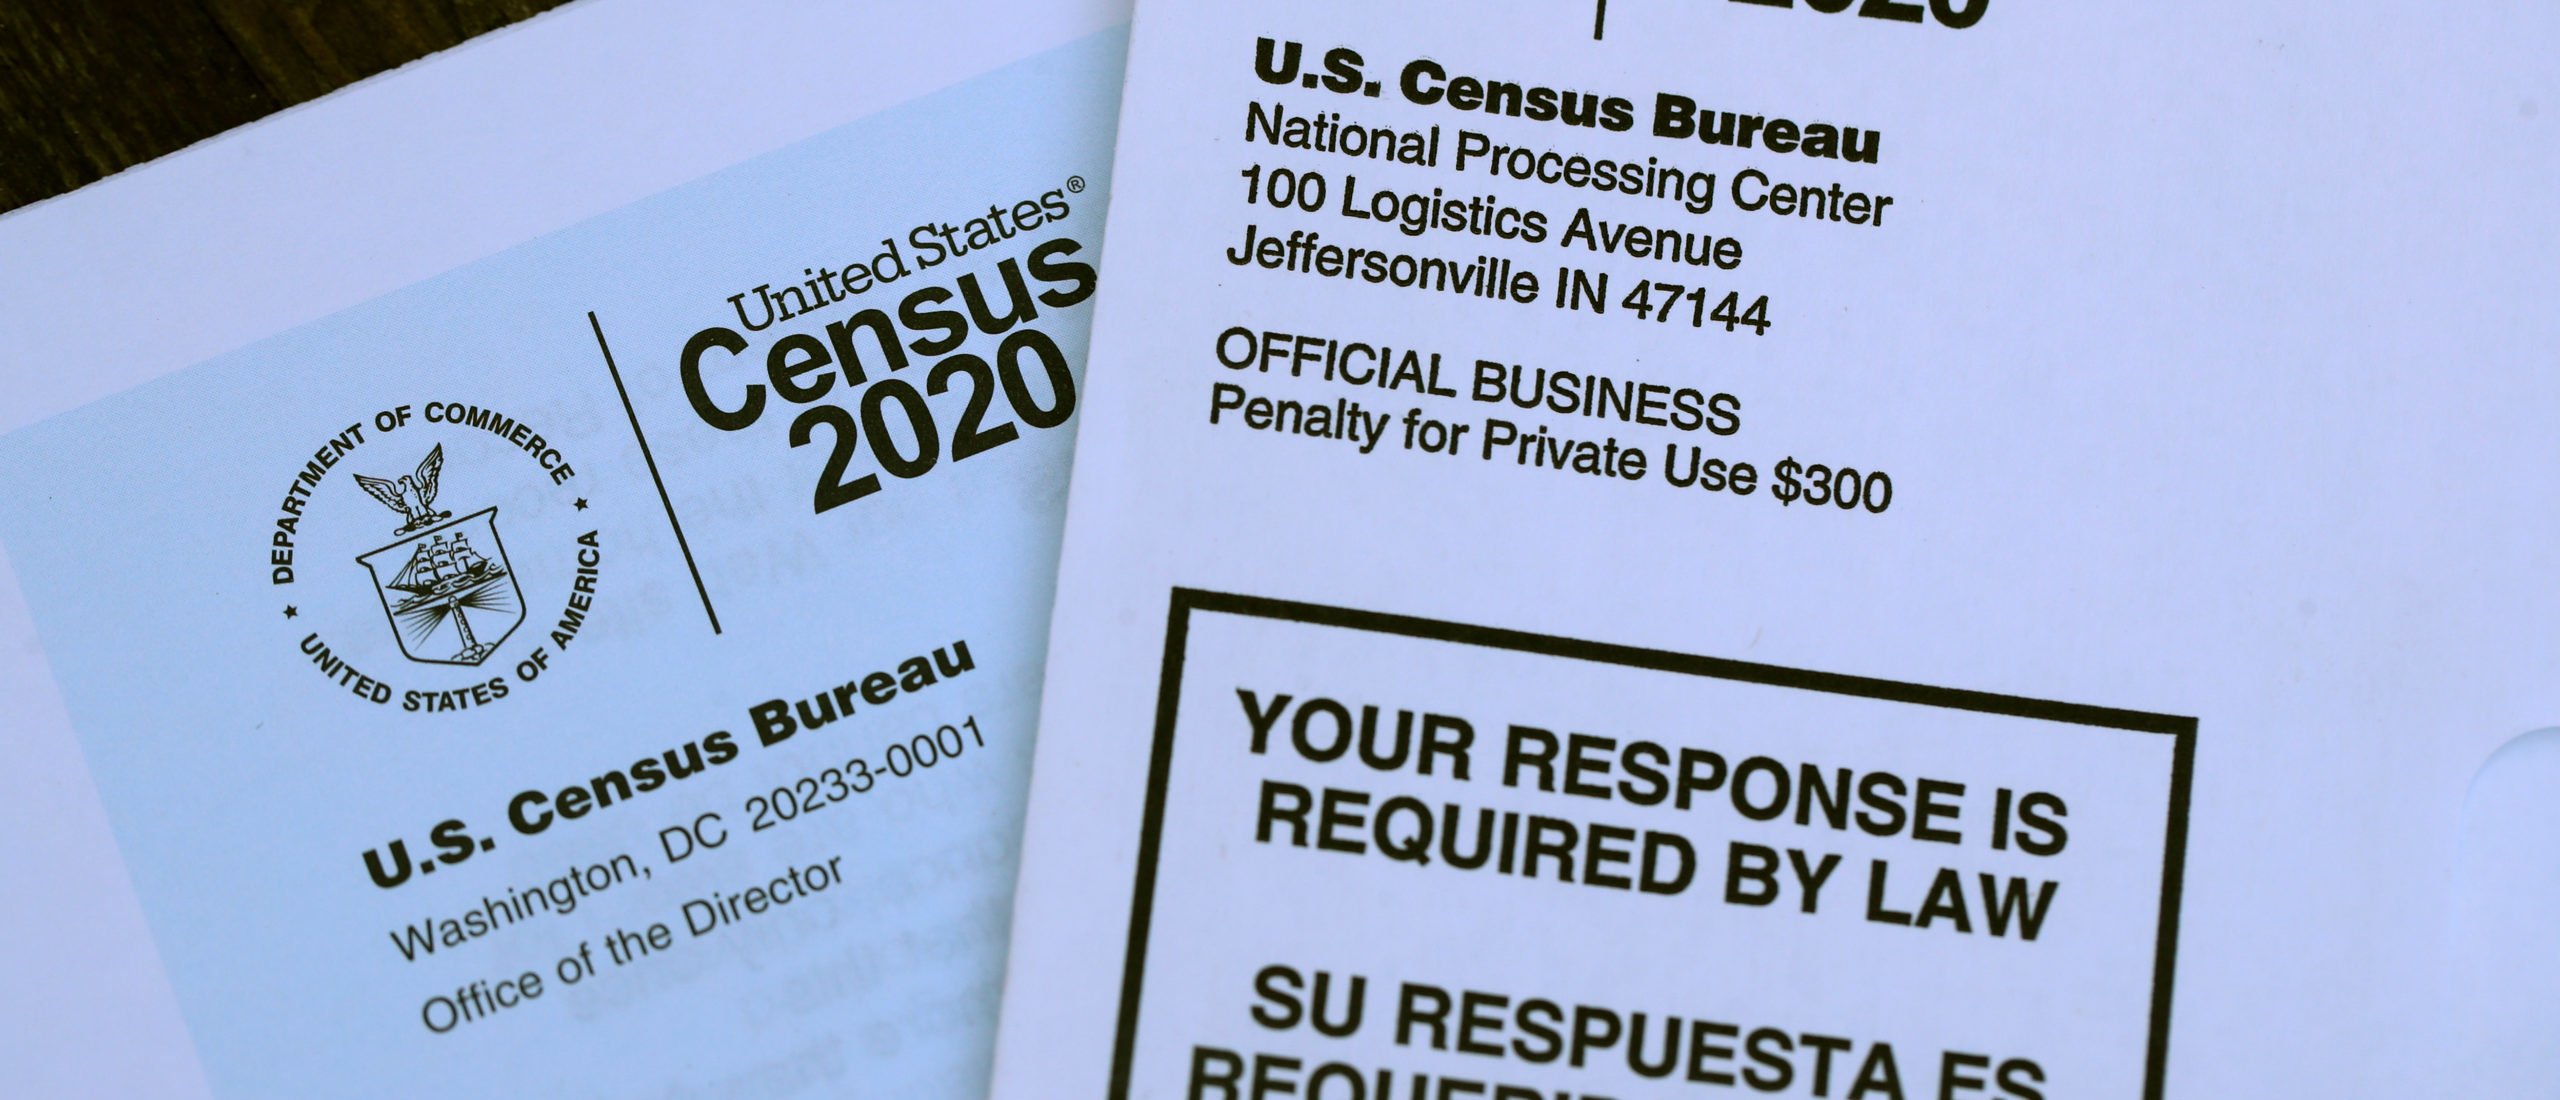 SAN ANSELMO, CALIFORNIA - MARCH 19: The U.S. Census logo appears on census materials received in the mail with an invitation to fill out census information online on March 19, 2020 in San Anselmo, California. The U.S. Census Bureau announced that it has suspended census field operations for the next two weeks over concerns of the census workers and their public interactions amid the global coronavirus pandemic. (Photo Illustration by Justin Sullivan/Getty Images)